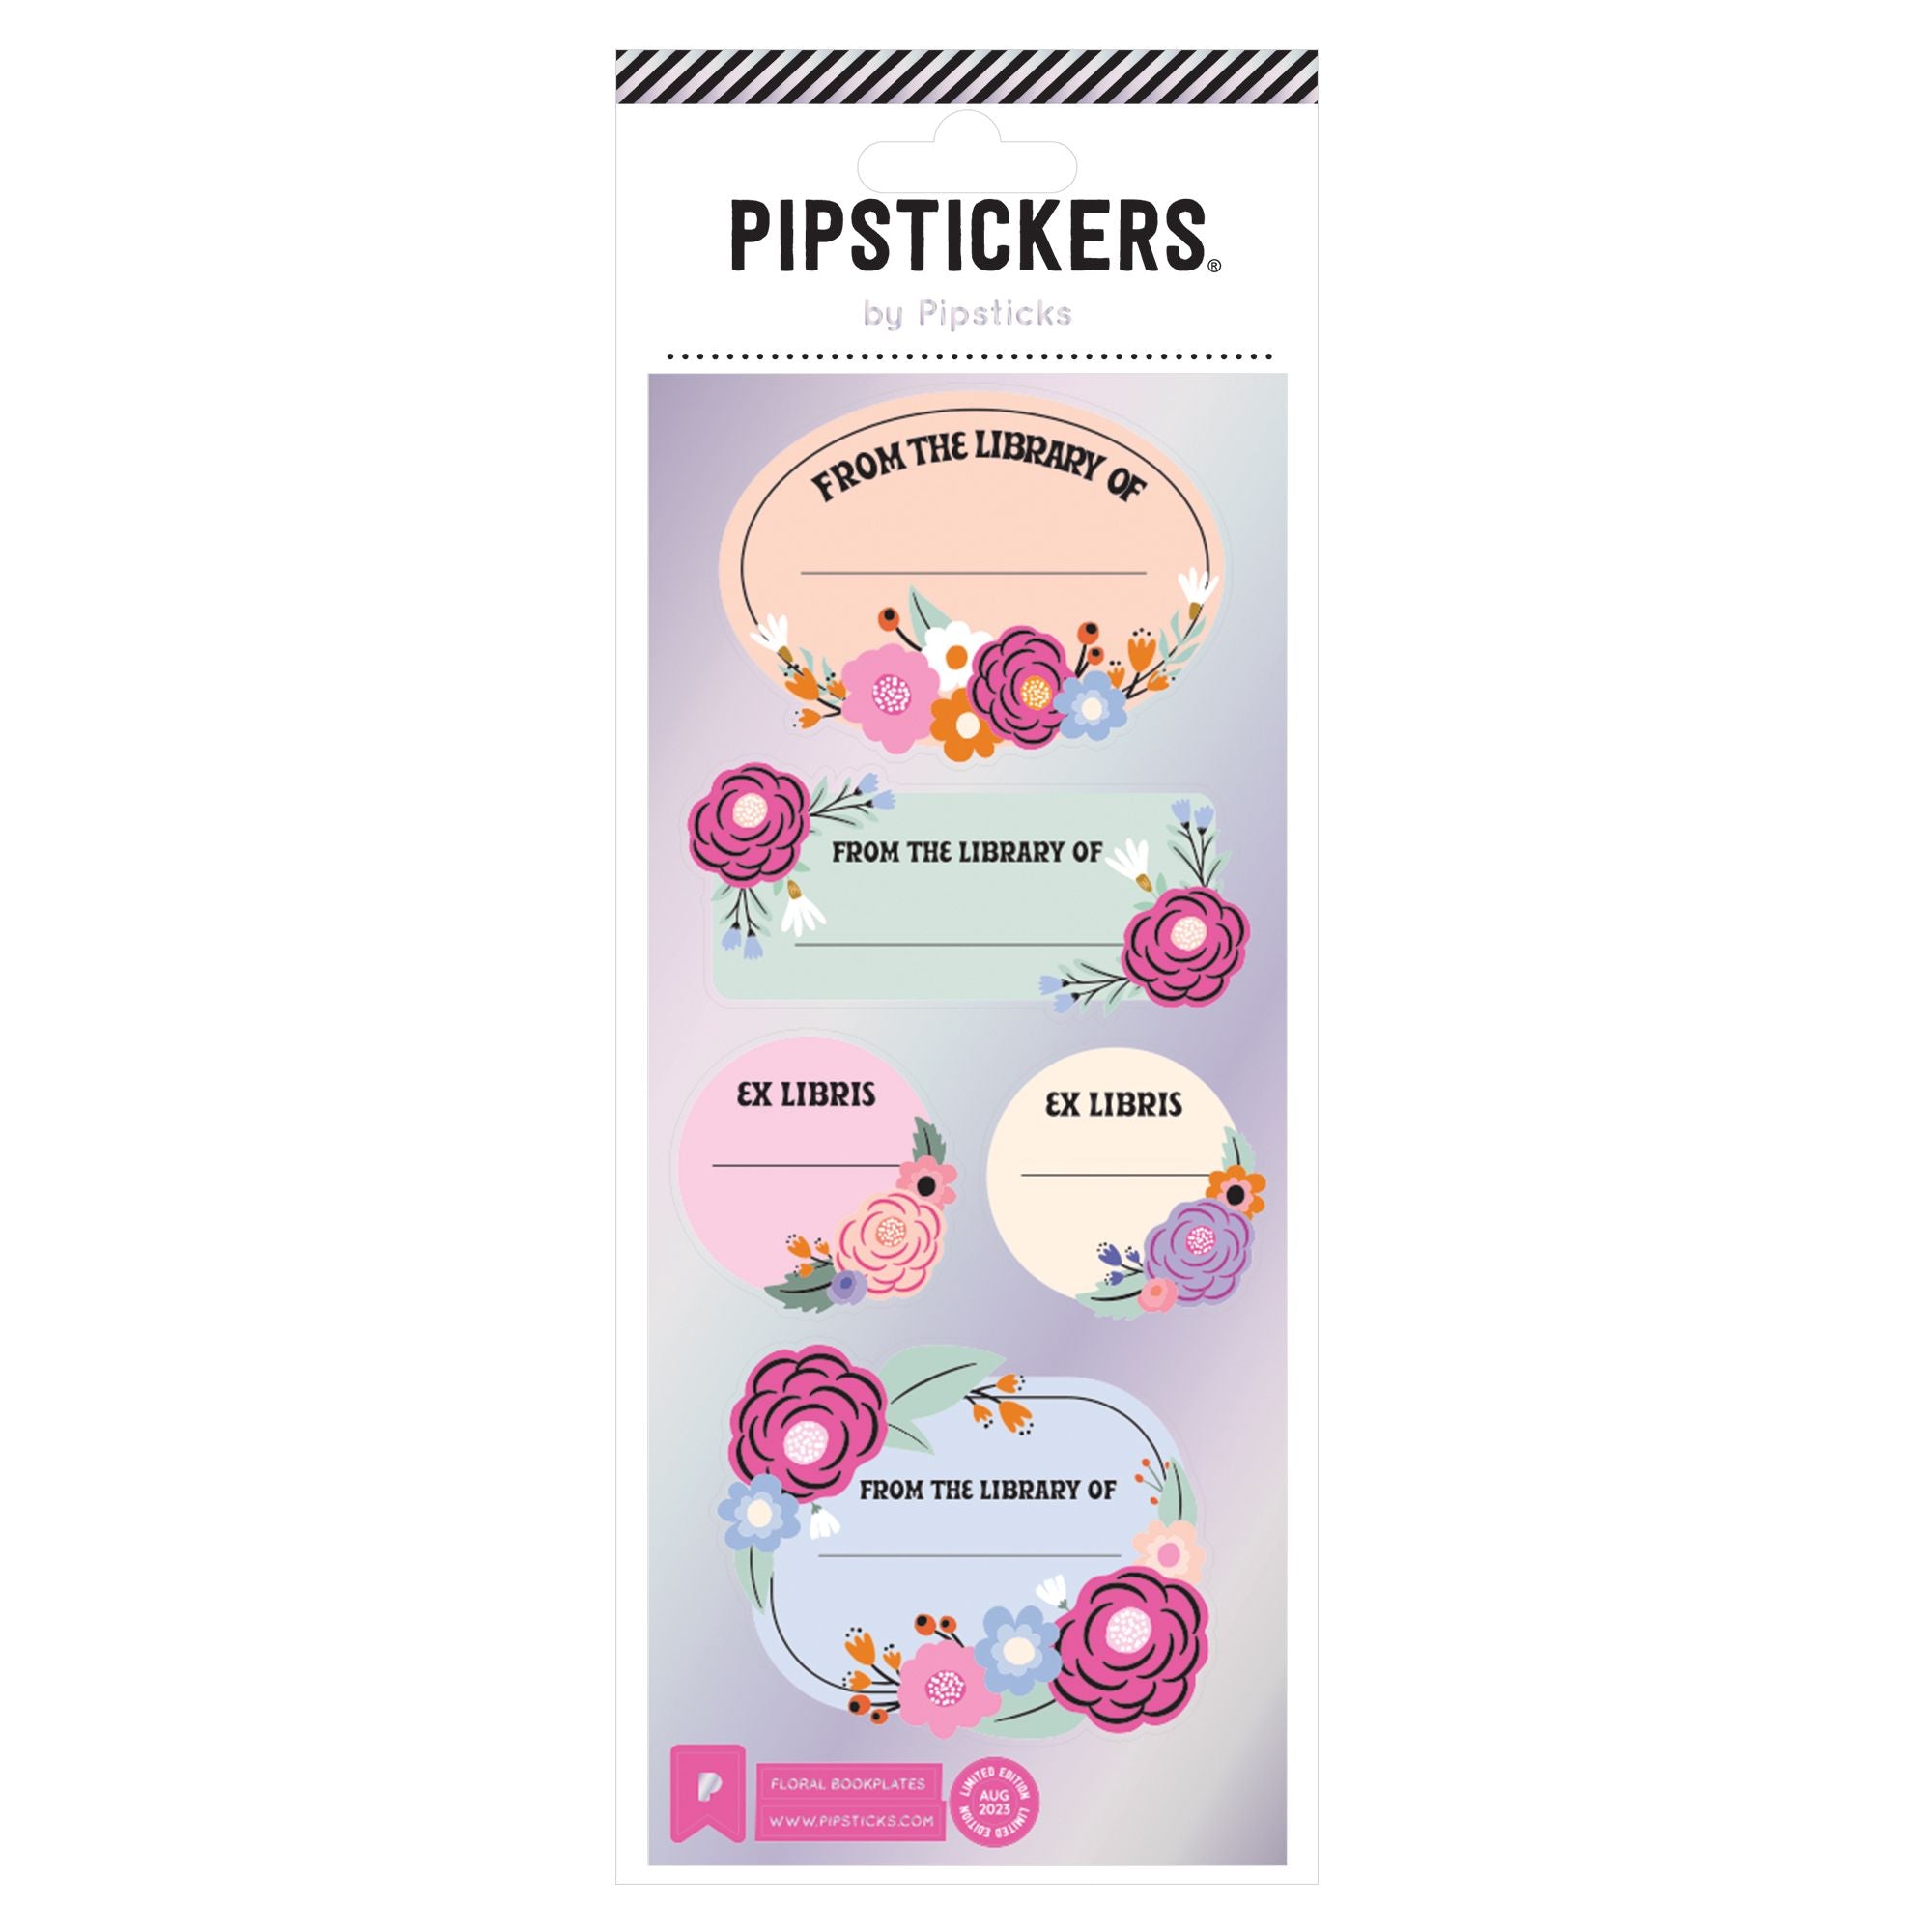 Pipsticks All You Can Eat Pro Classic Pack